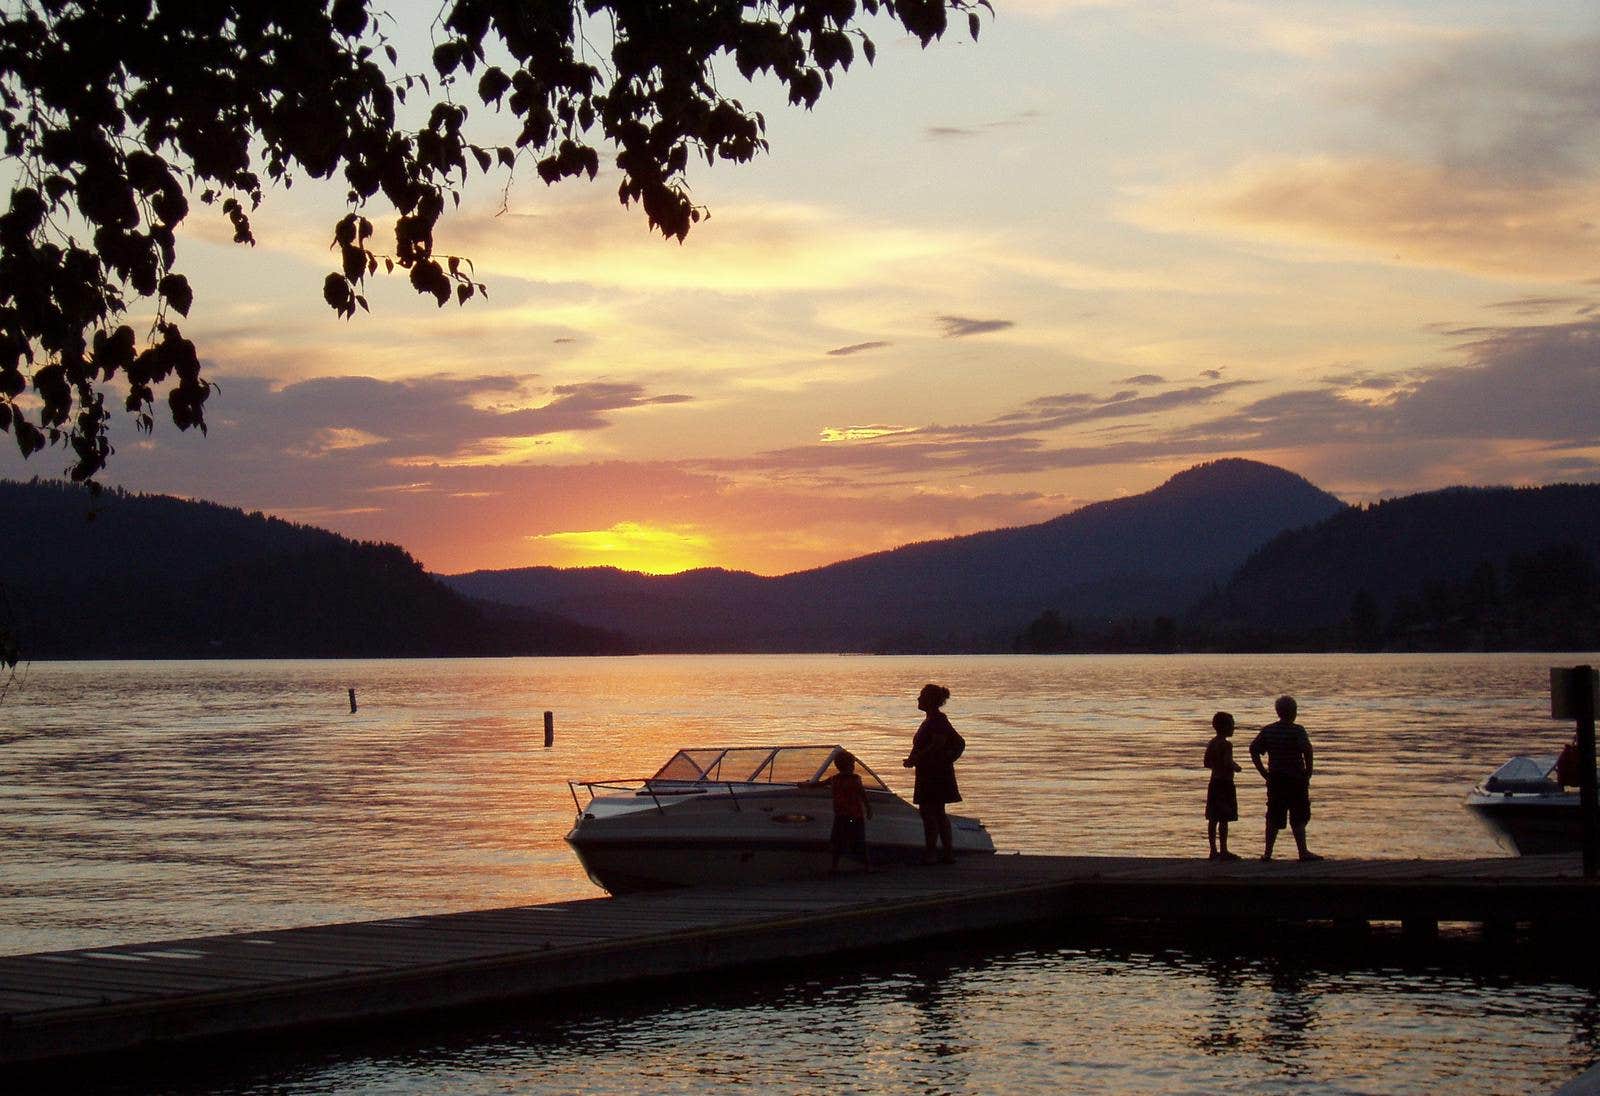 SP Boaters



Off the lake at sunset.

Credit: